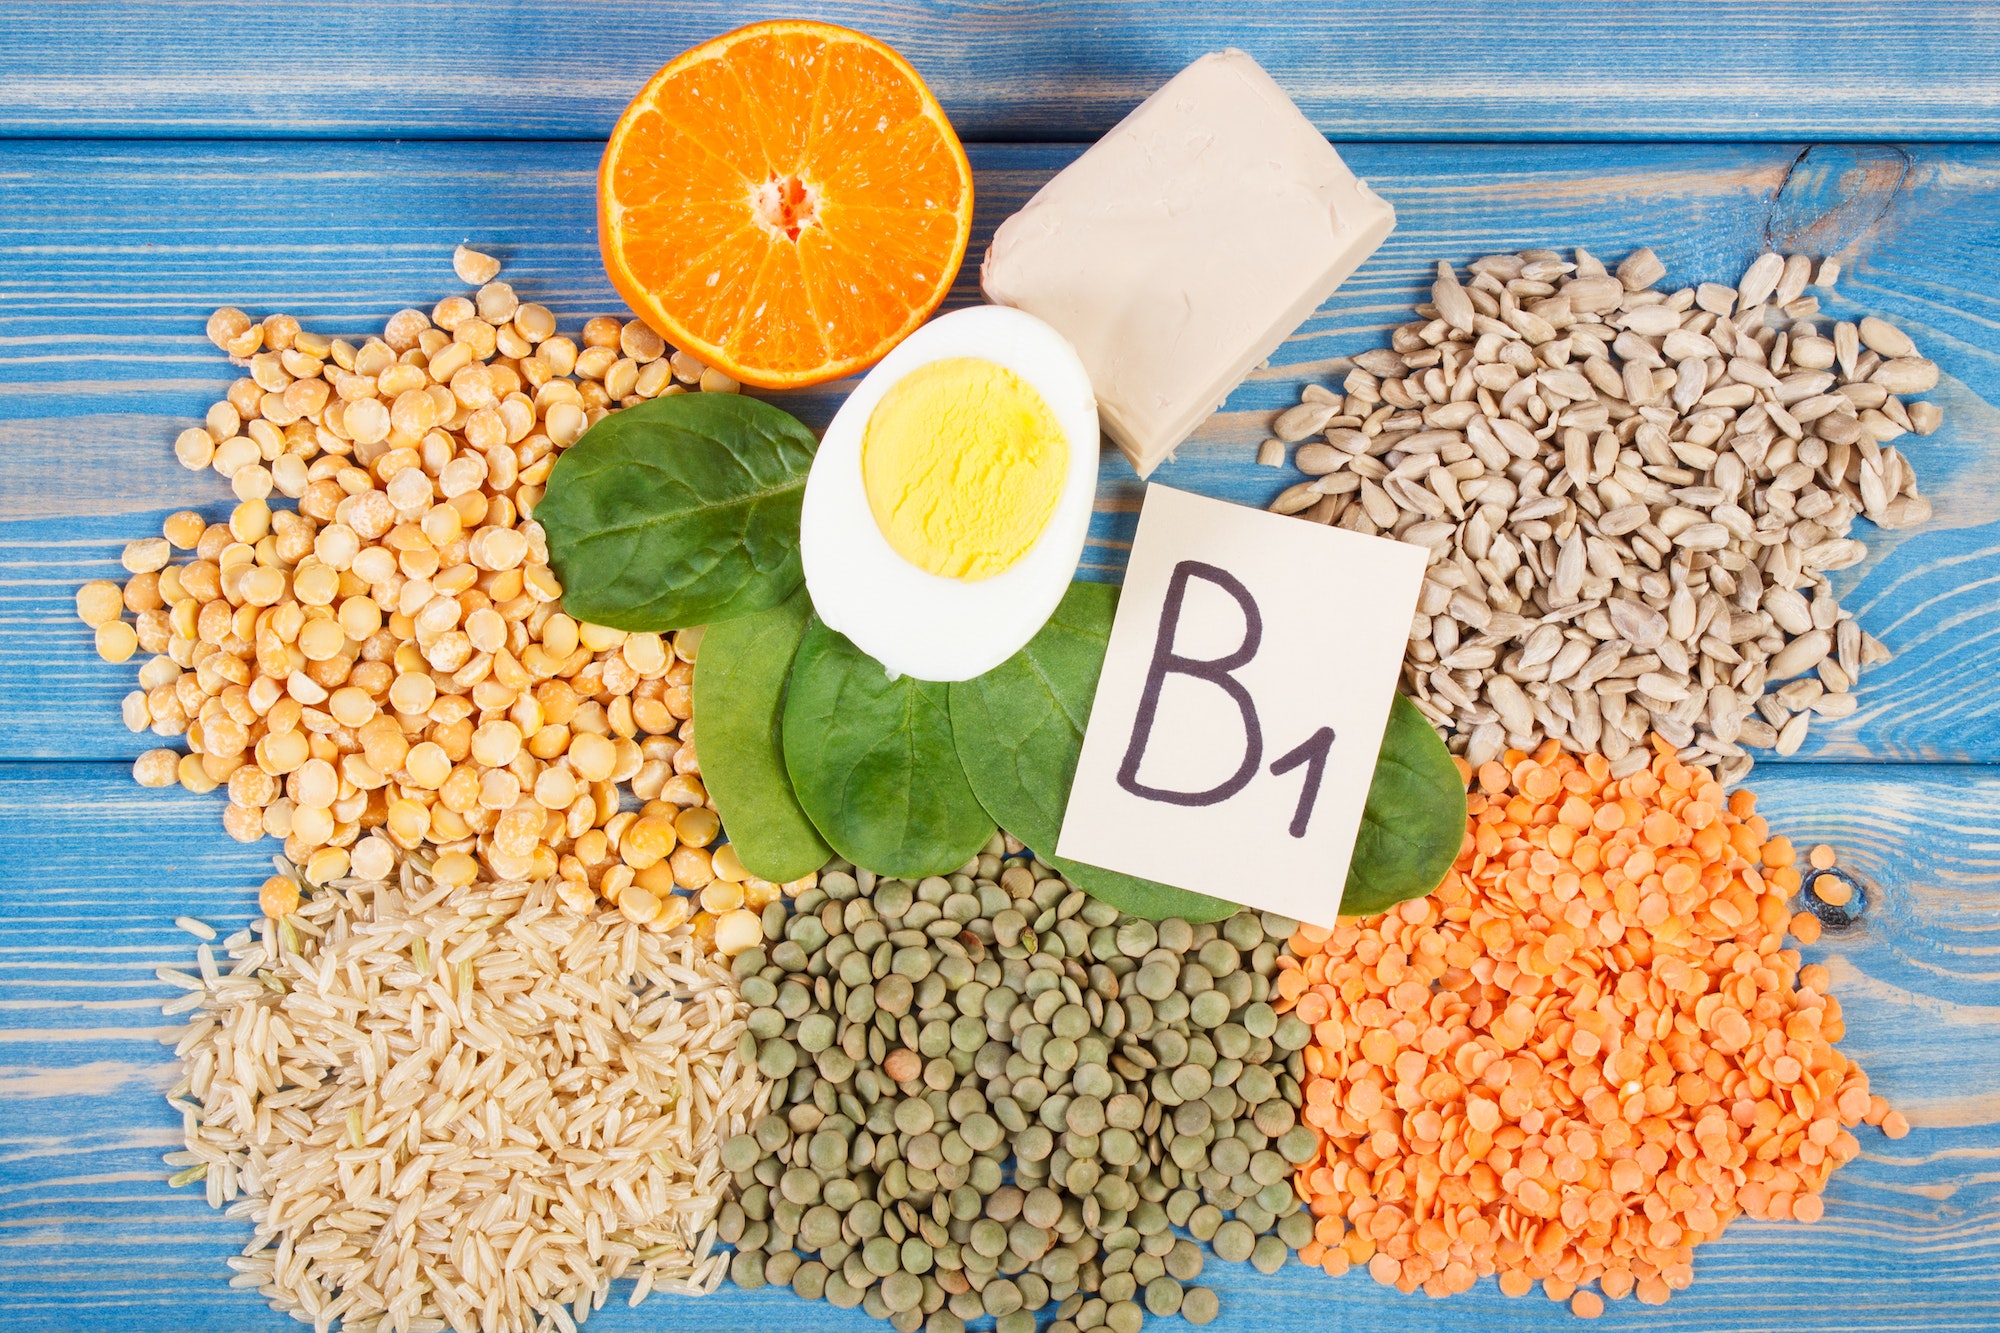 Ingredients containing vitamin B1 and dietary fiber, healthy nutrition